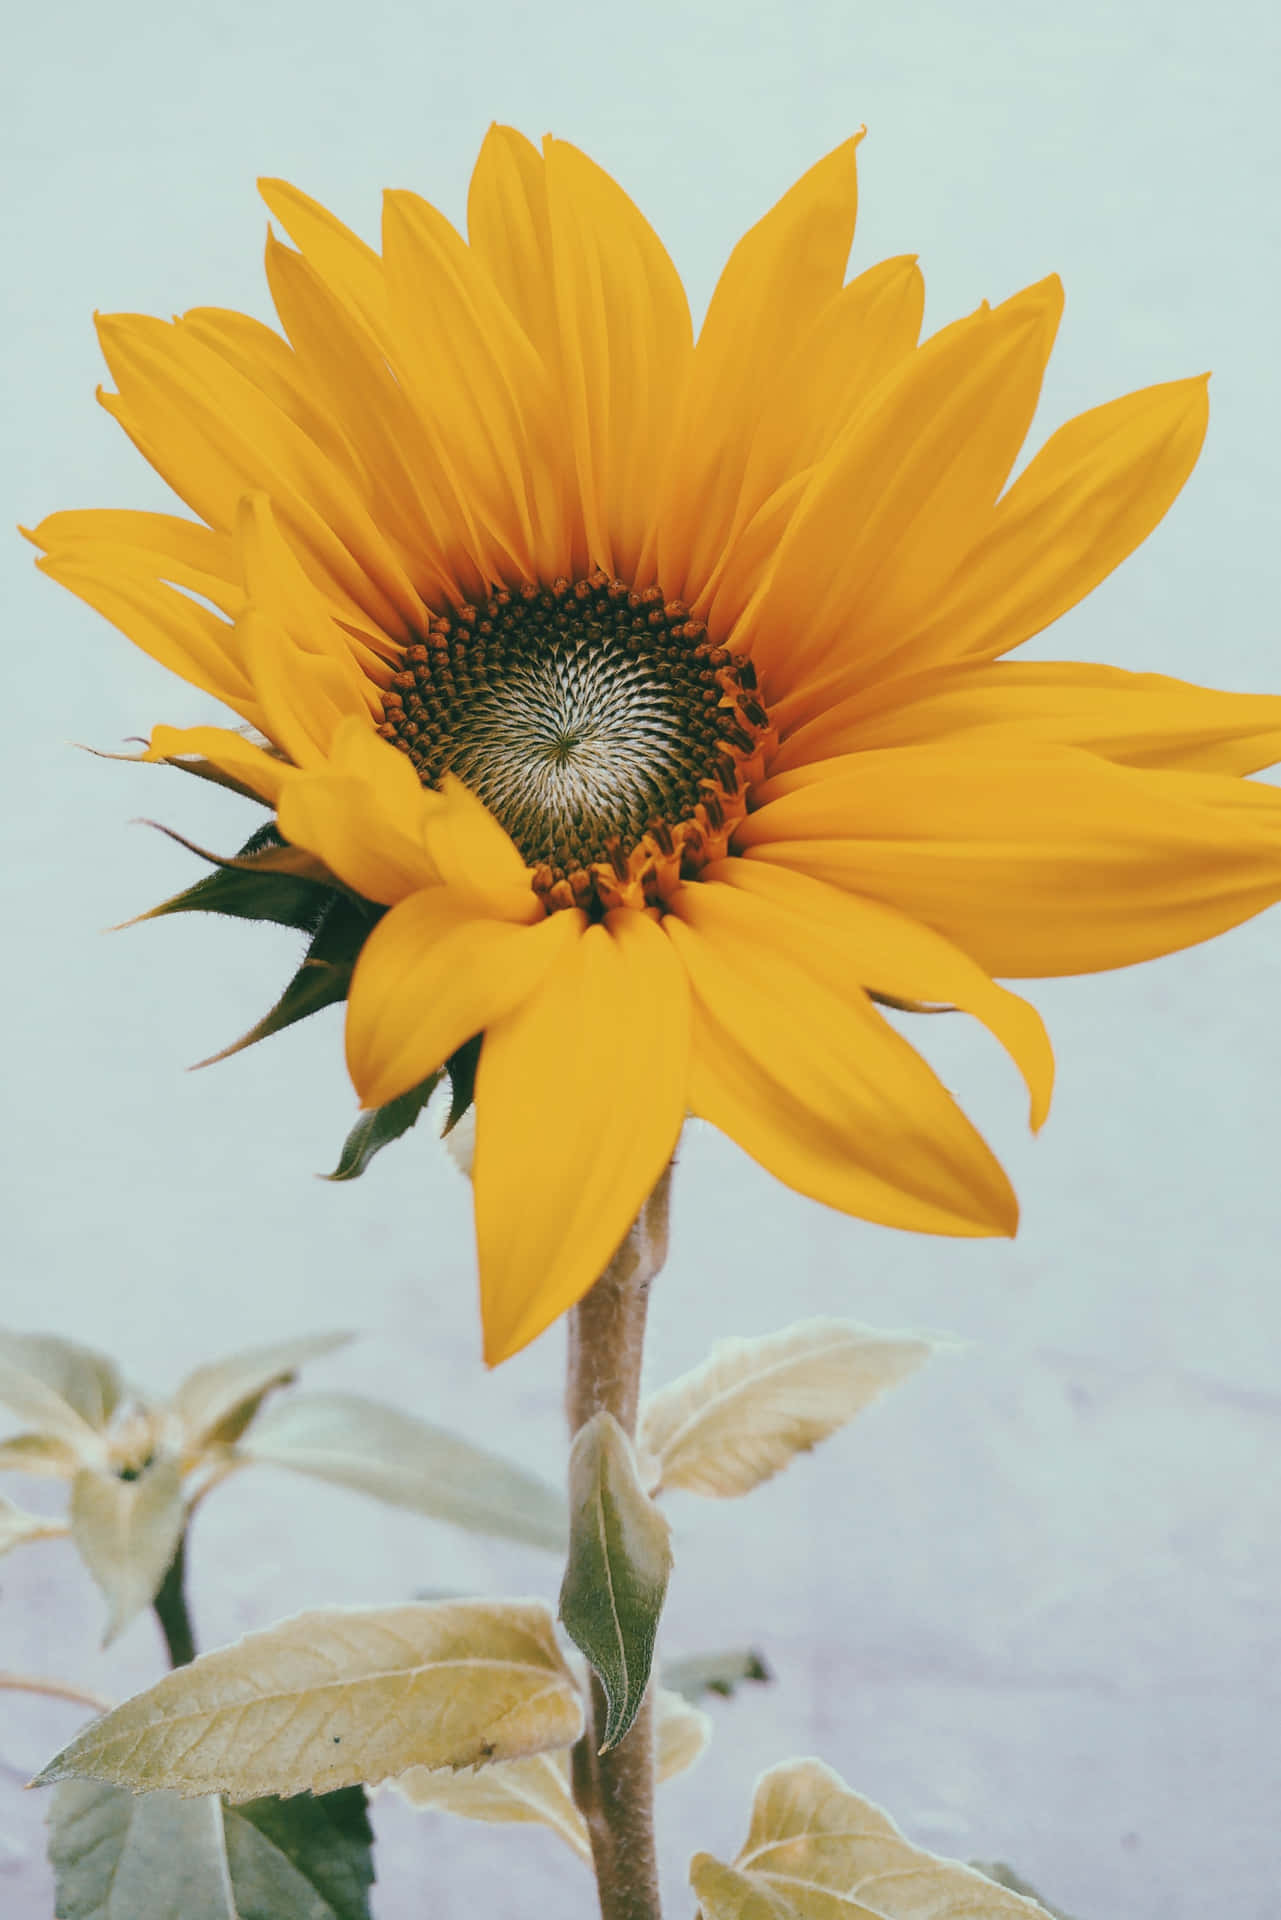 “Bask in the sunshine of this bright yellow sunflower.” Wallpaper